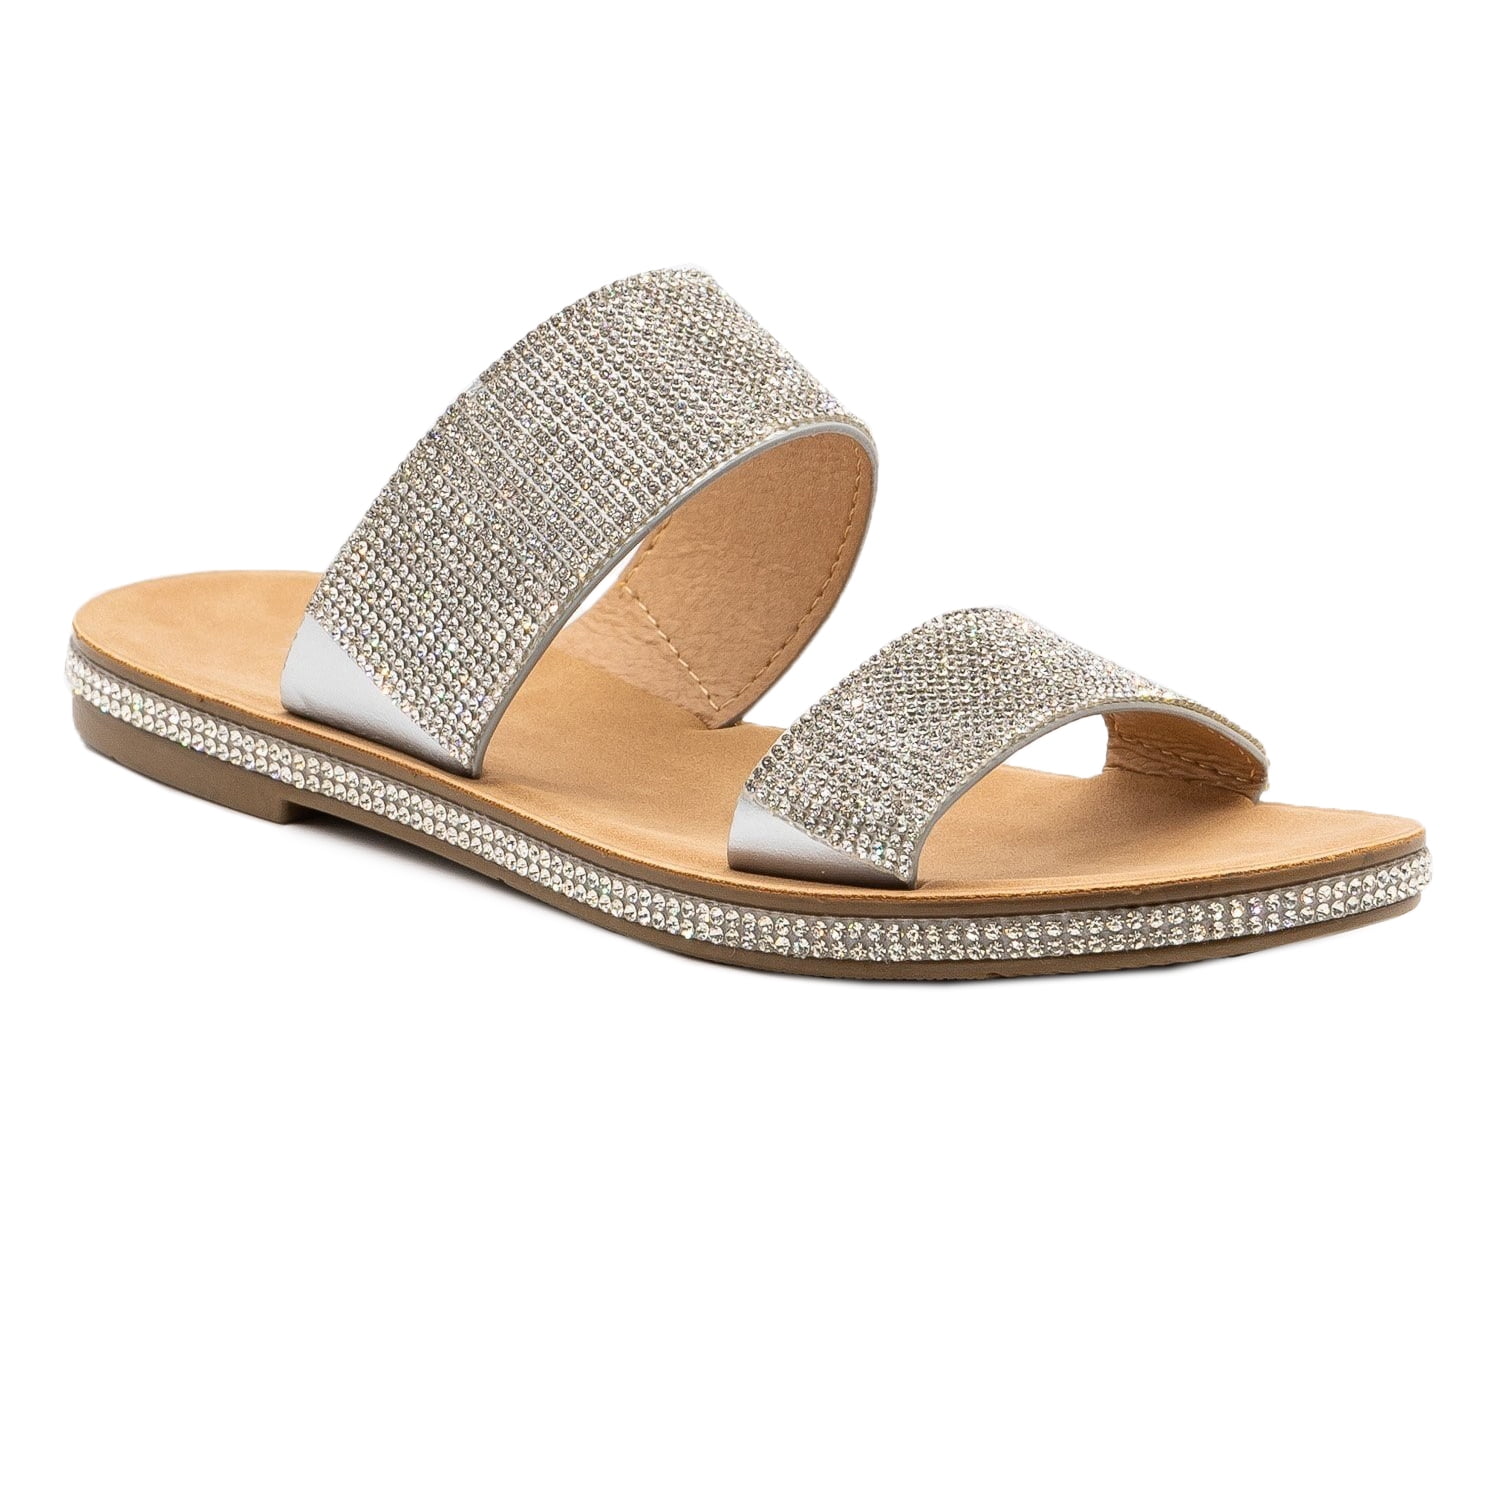 New Women's Rhiestone Double Strap Extra Cushioned Footbed Sandal ...